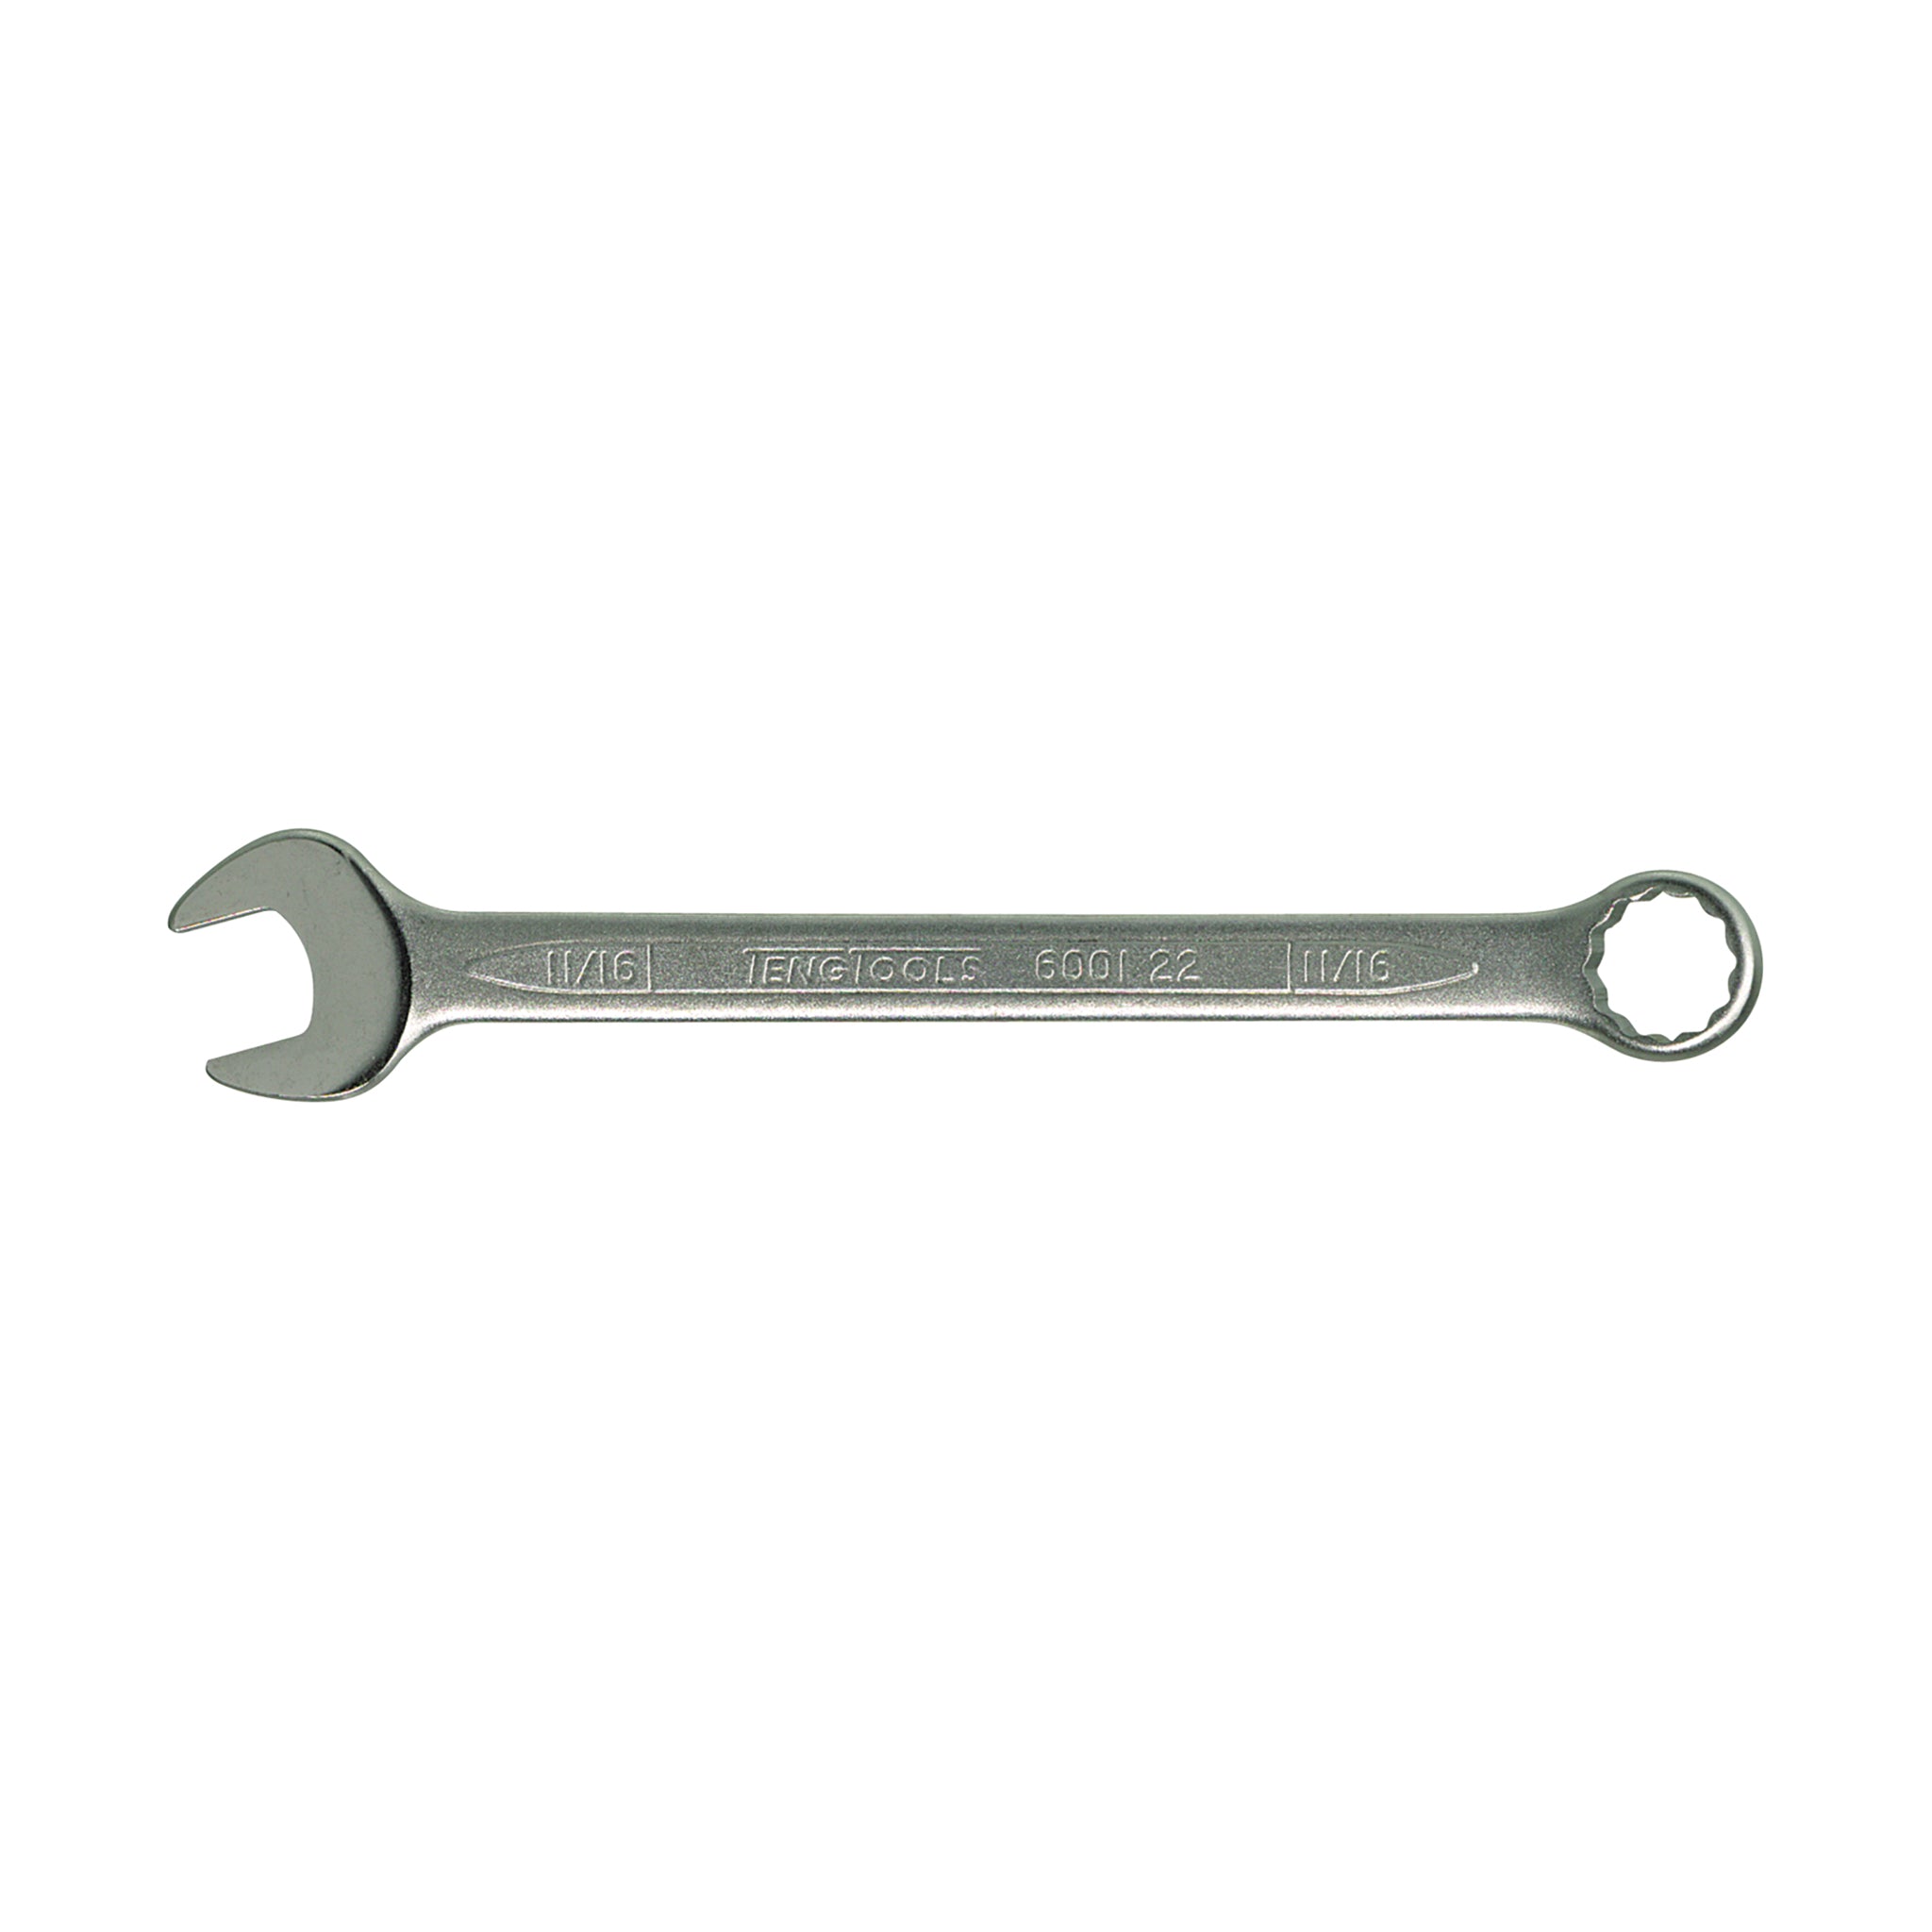 Standard Combination SAE Wrenches Made With Chrome Vanadium Steel - 1/2